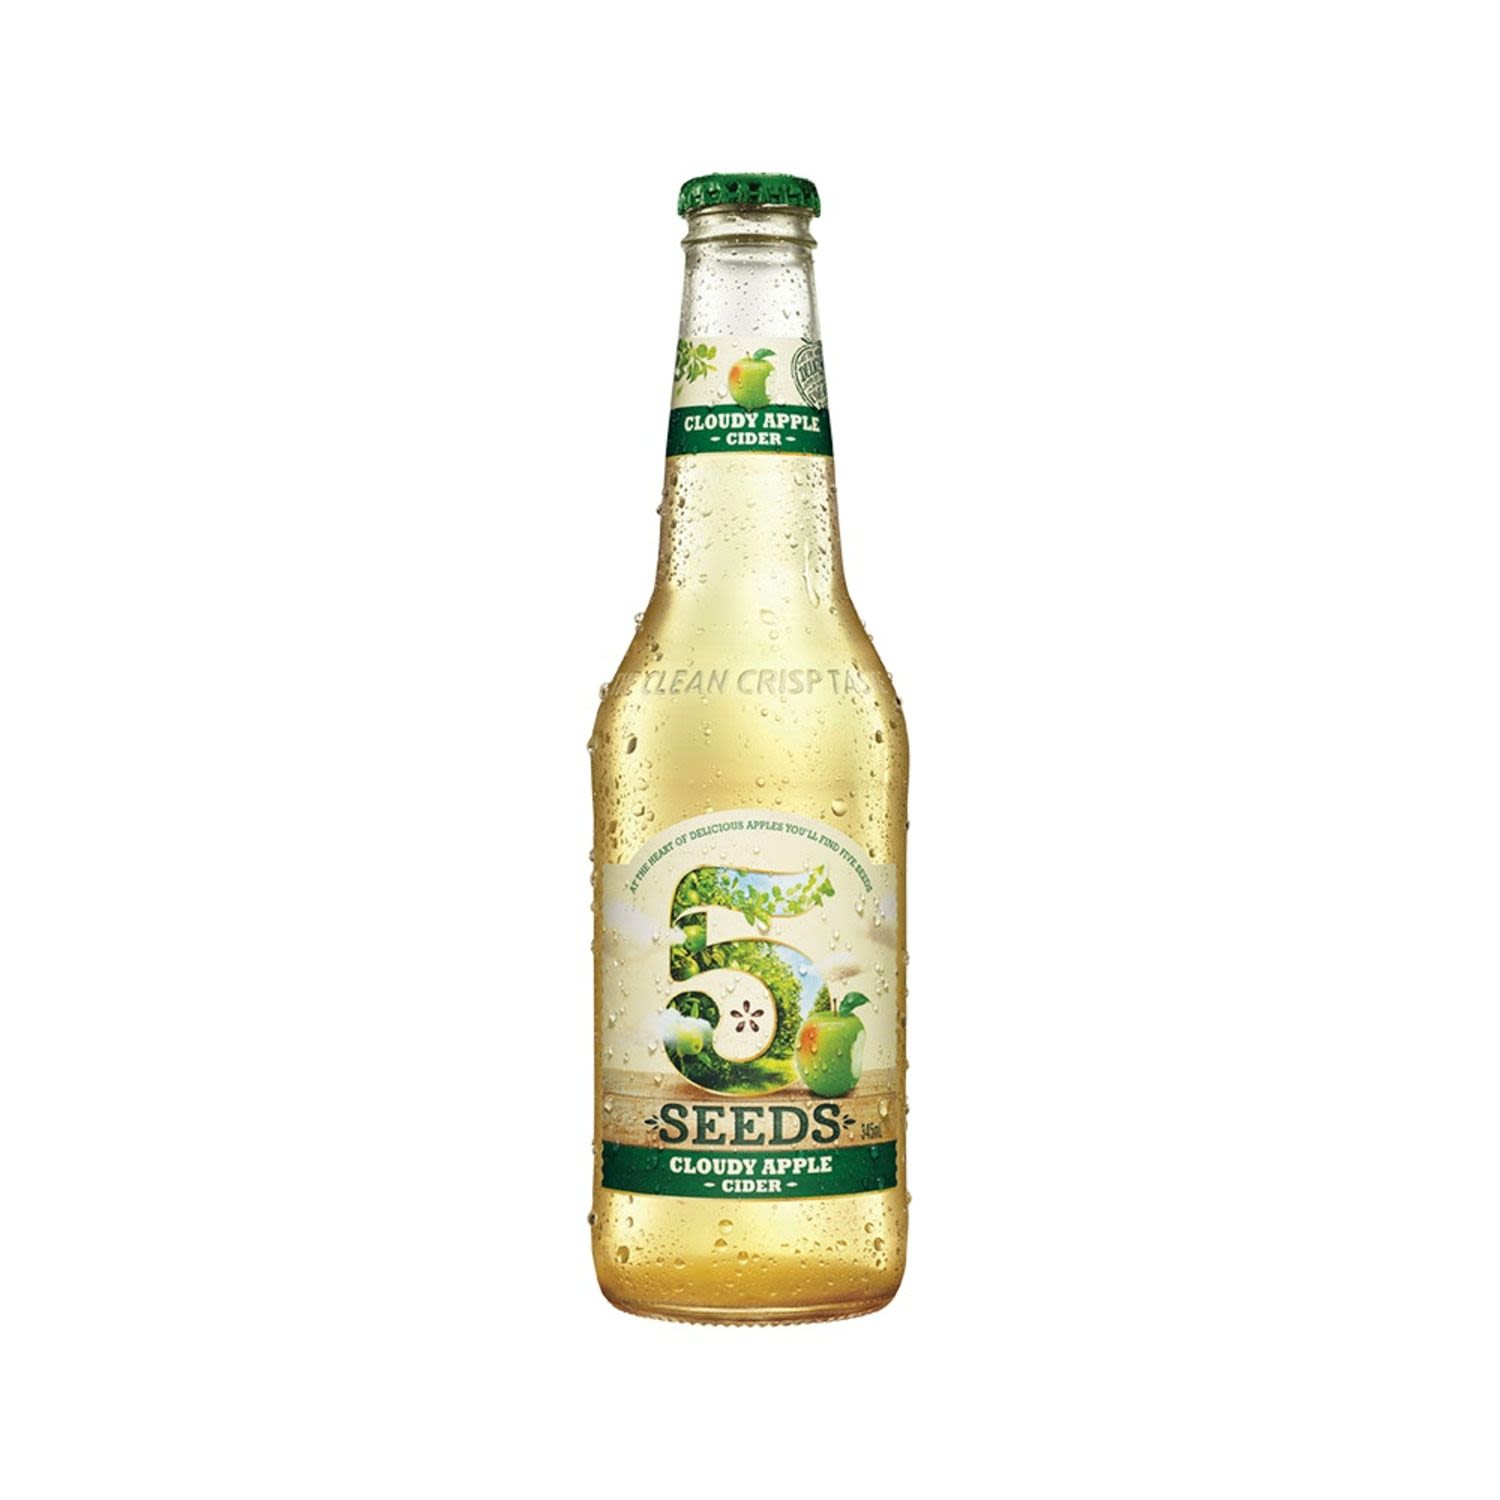 Made using cloudy apple juice which enhances its distinct taste thatâ€™s like green apples. Well rounded tartness, with a fresh and fruity finish.<br /> <br />Alcohol Volume: 5.00%<br /><br />Pack Format: Bottle<br /><br />Standard Drinks: 1.4</br /><br />Pack Type: Bottle<br /><br />Country of Origin: Australia<br />